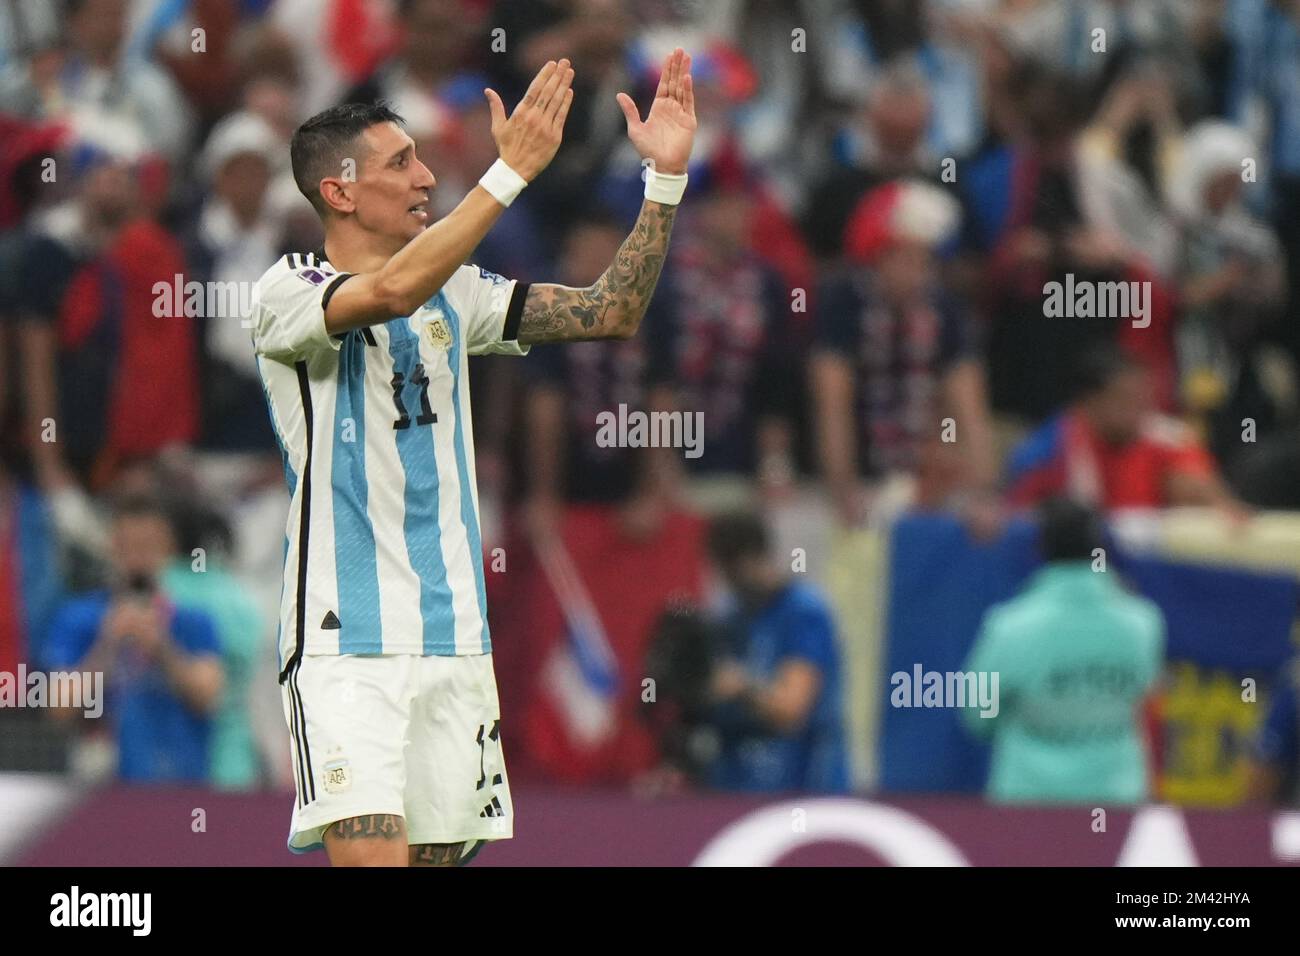 Lusail, Qatar. 18/12/2022, Lusail, Qatar. 18/12/2022Angel Di Maria of Argentina celebrates his goal during the FIFA World Cup Qatar 2022 match, Final, between Argentina and France played at Lusail Stadium on Dec 18, 2022 in Lusail, Qatar. (Photo by Bagu Blanco / PRESSIN) Credit: PRESSINPHOTO SPORTS AGENCY/Alamy Live News Credit: PRESSINPHOTO SPORTS AGENCY/Alamy Live News Stock Photo